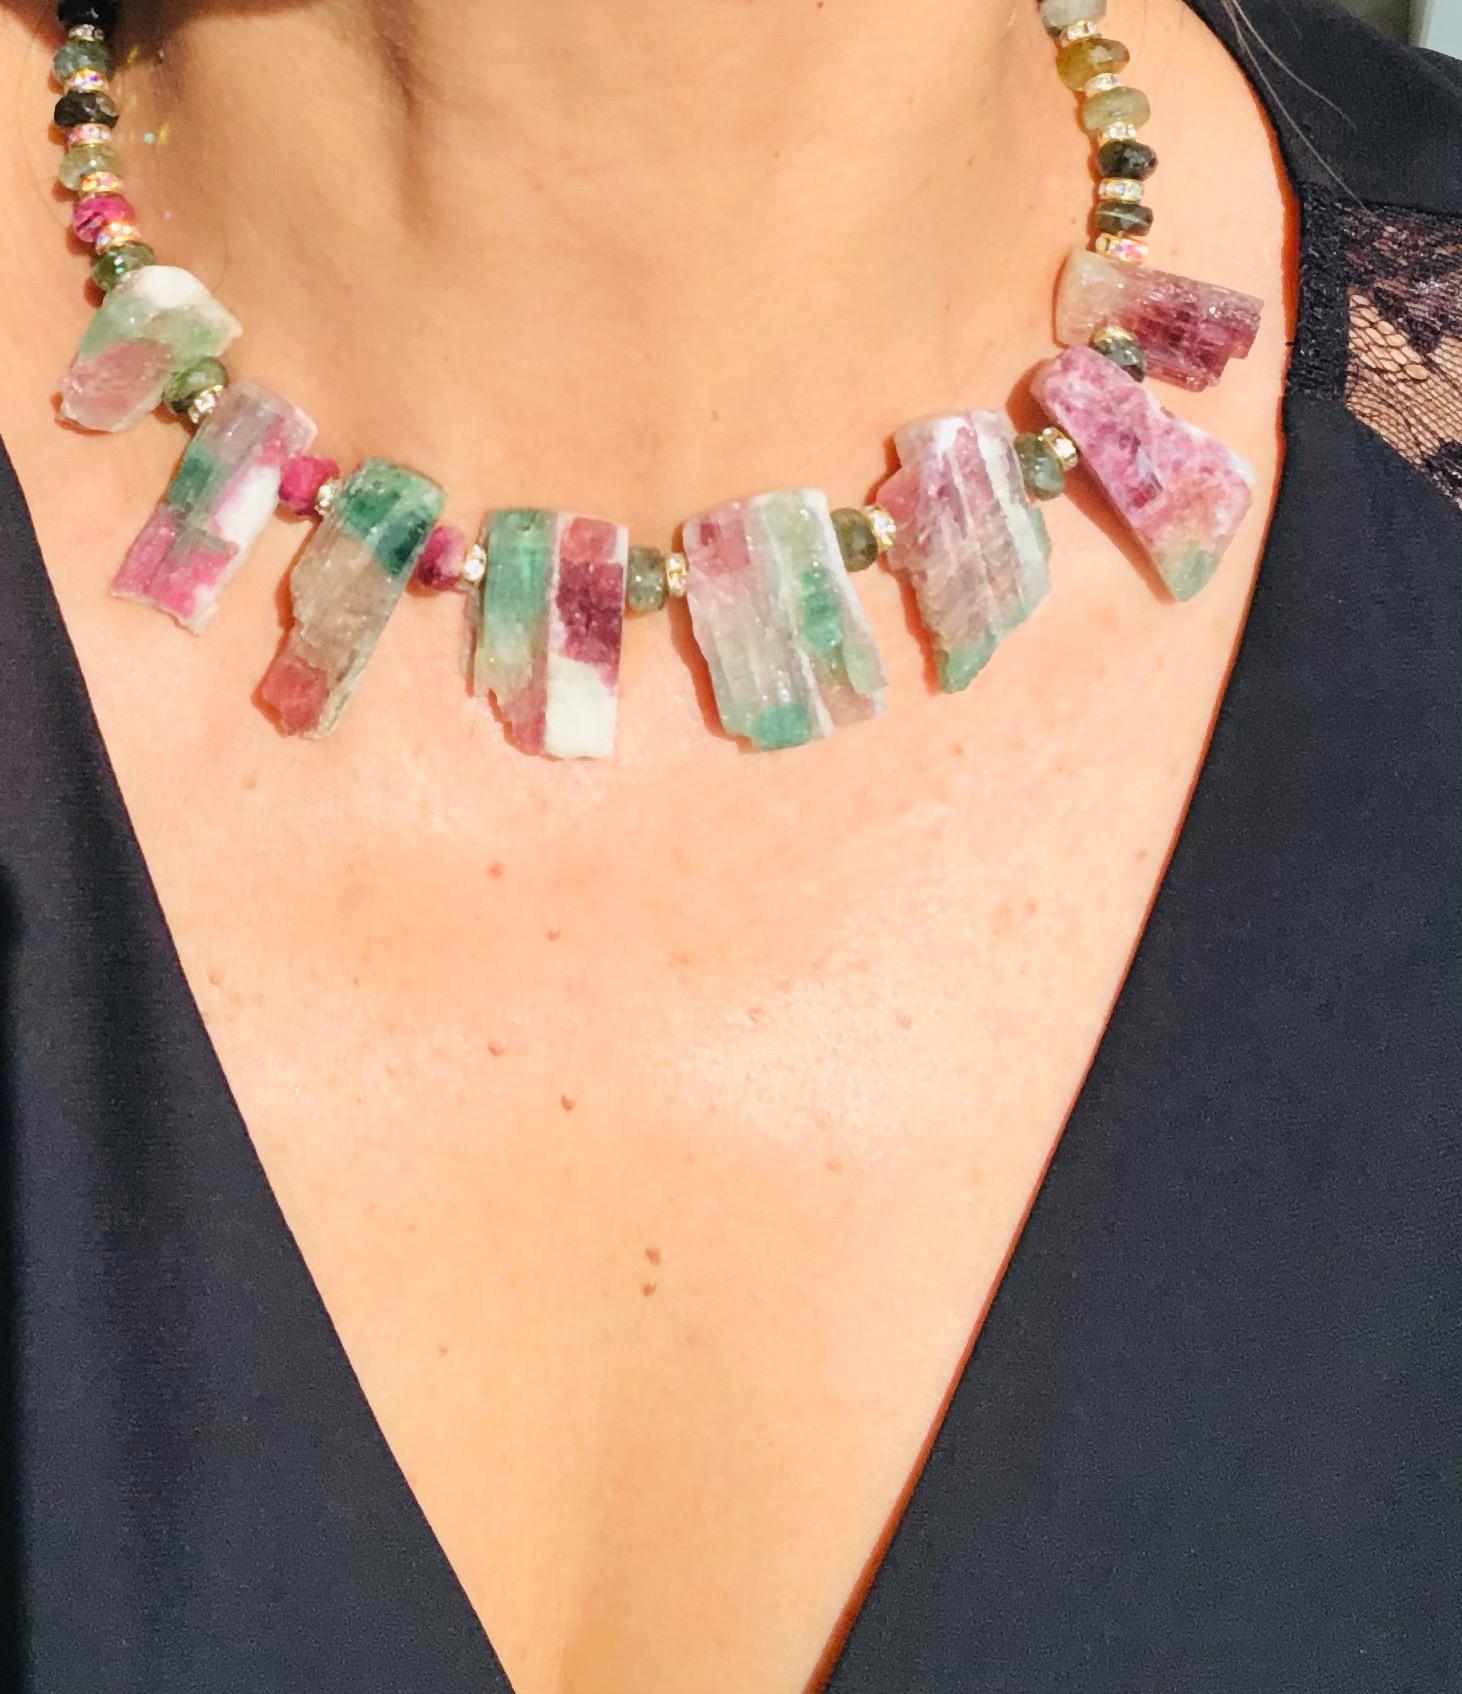 One-of-a-Kind
Introducing a truly one-of-a-kind creation - our perfectly matched Tourmaline Geodes that beautifully showcase the captivating hues of green, gradually transitioning to a luscious pink on the inside - a stunning reminder of the